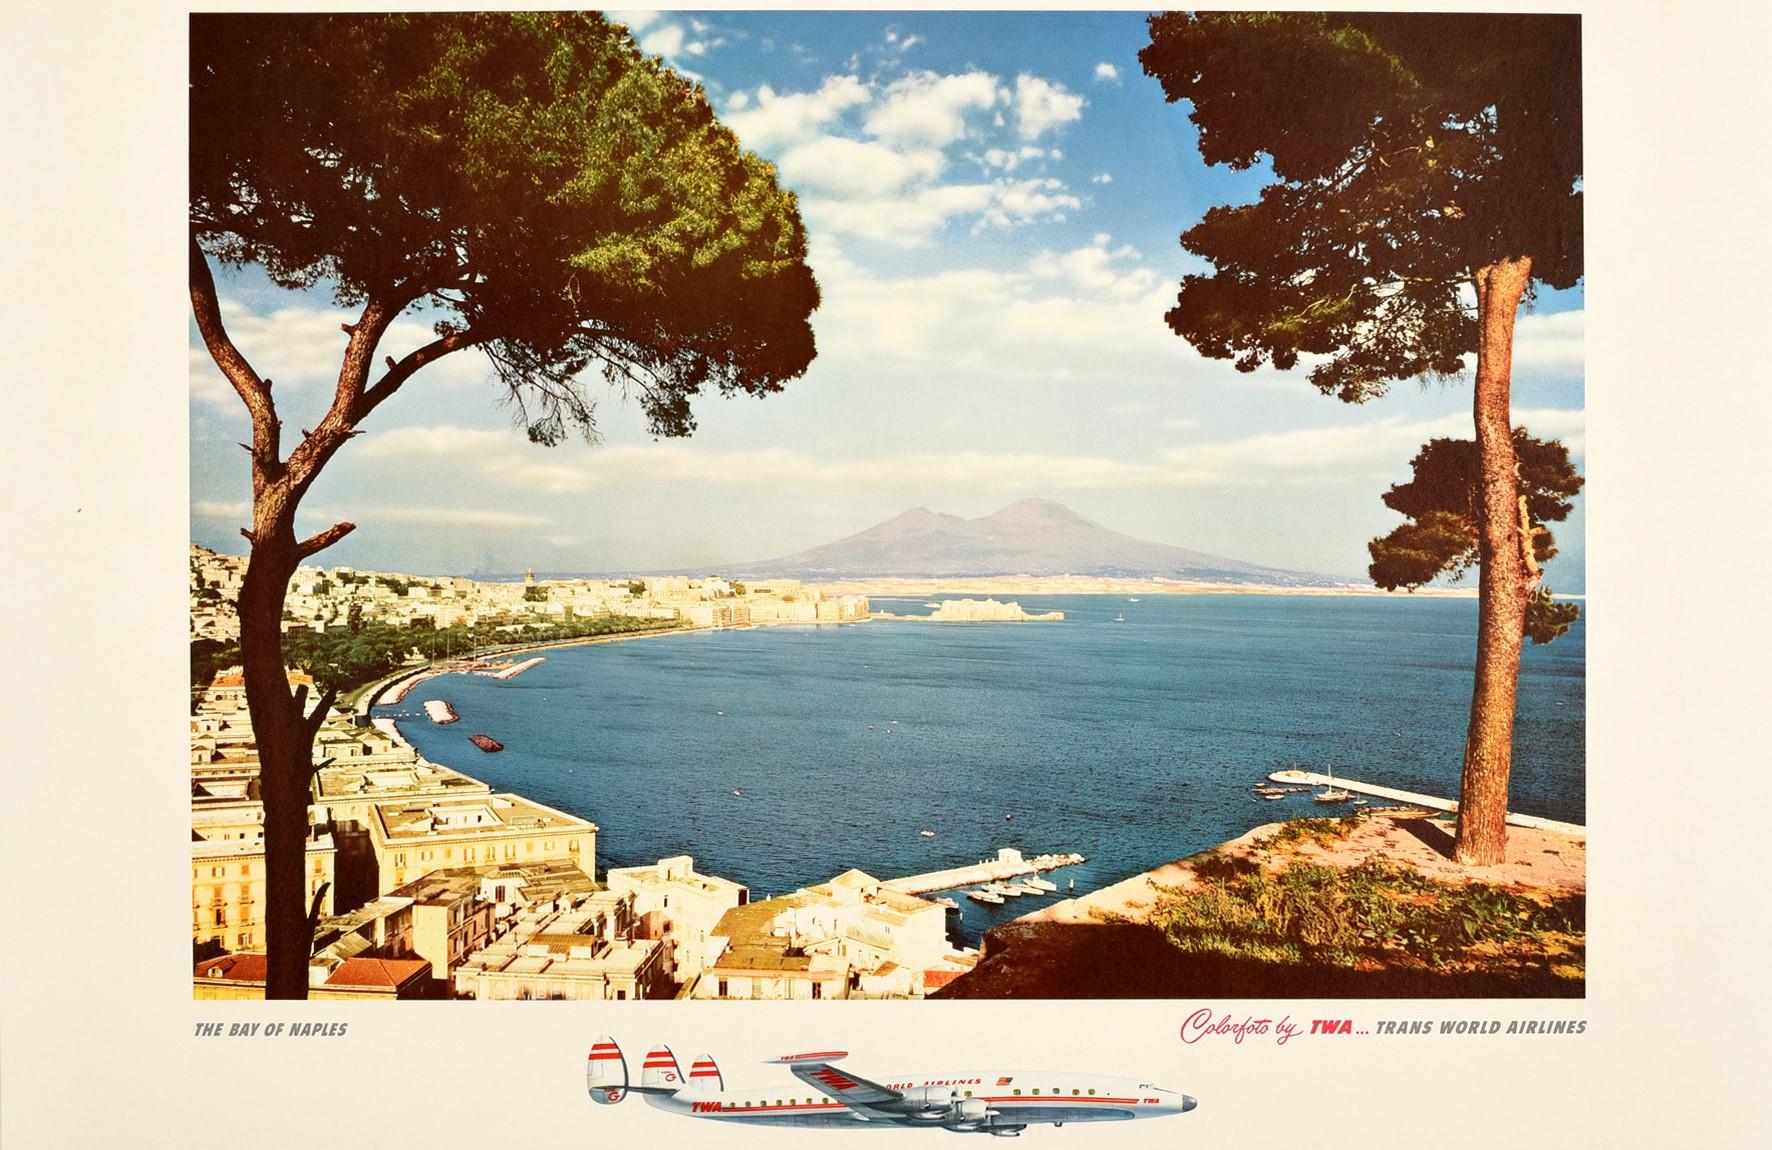 Original vintage travel advertising poster - Along the way of TWA ... Italy The Bay of Naples Trans World Airlines - featuring a view over the Gulf of Naples towards Mount Vesuvius with the town along the peninsula, boats in the harbour on the calm